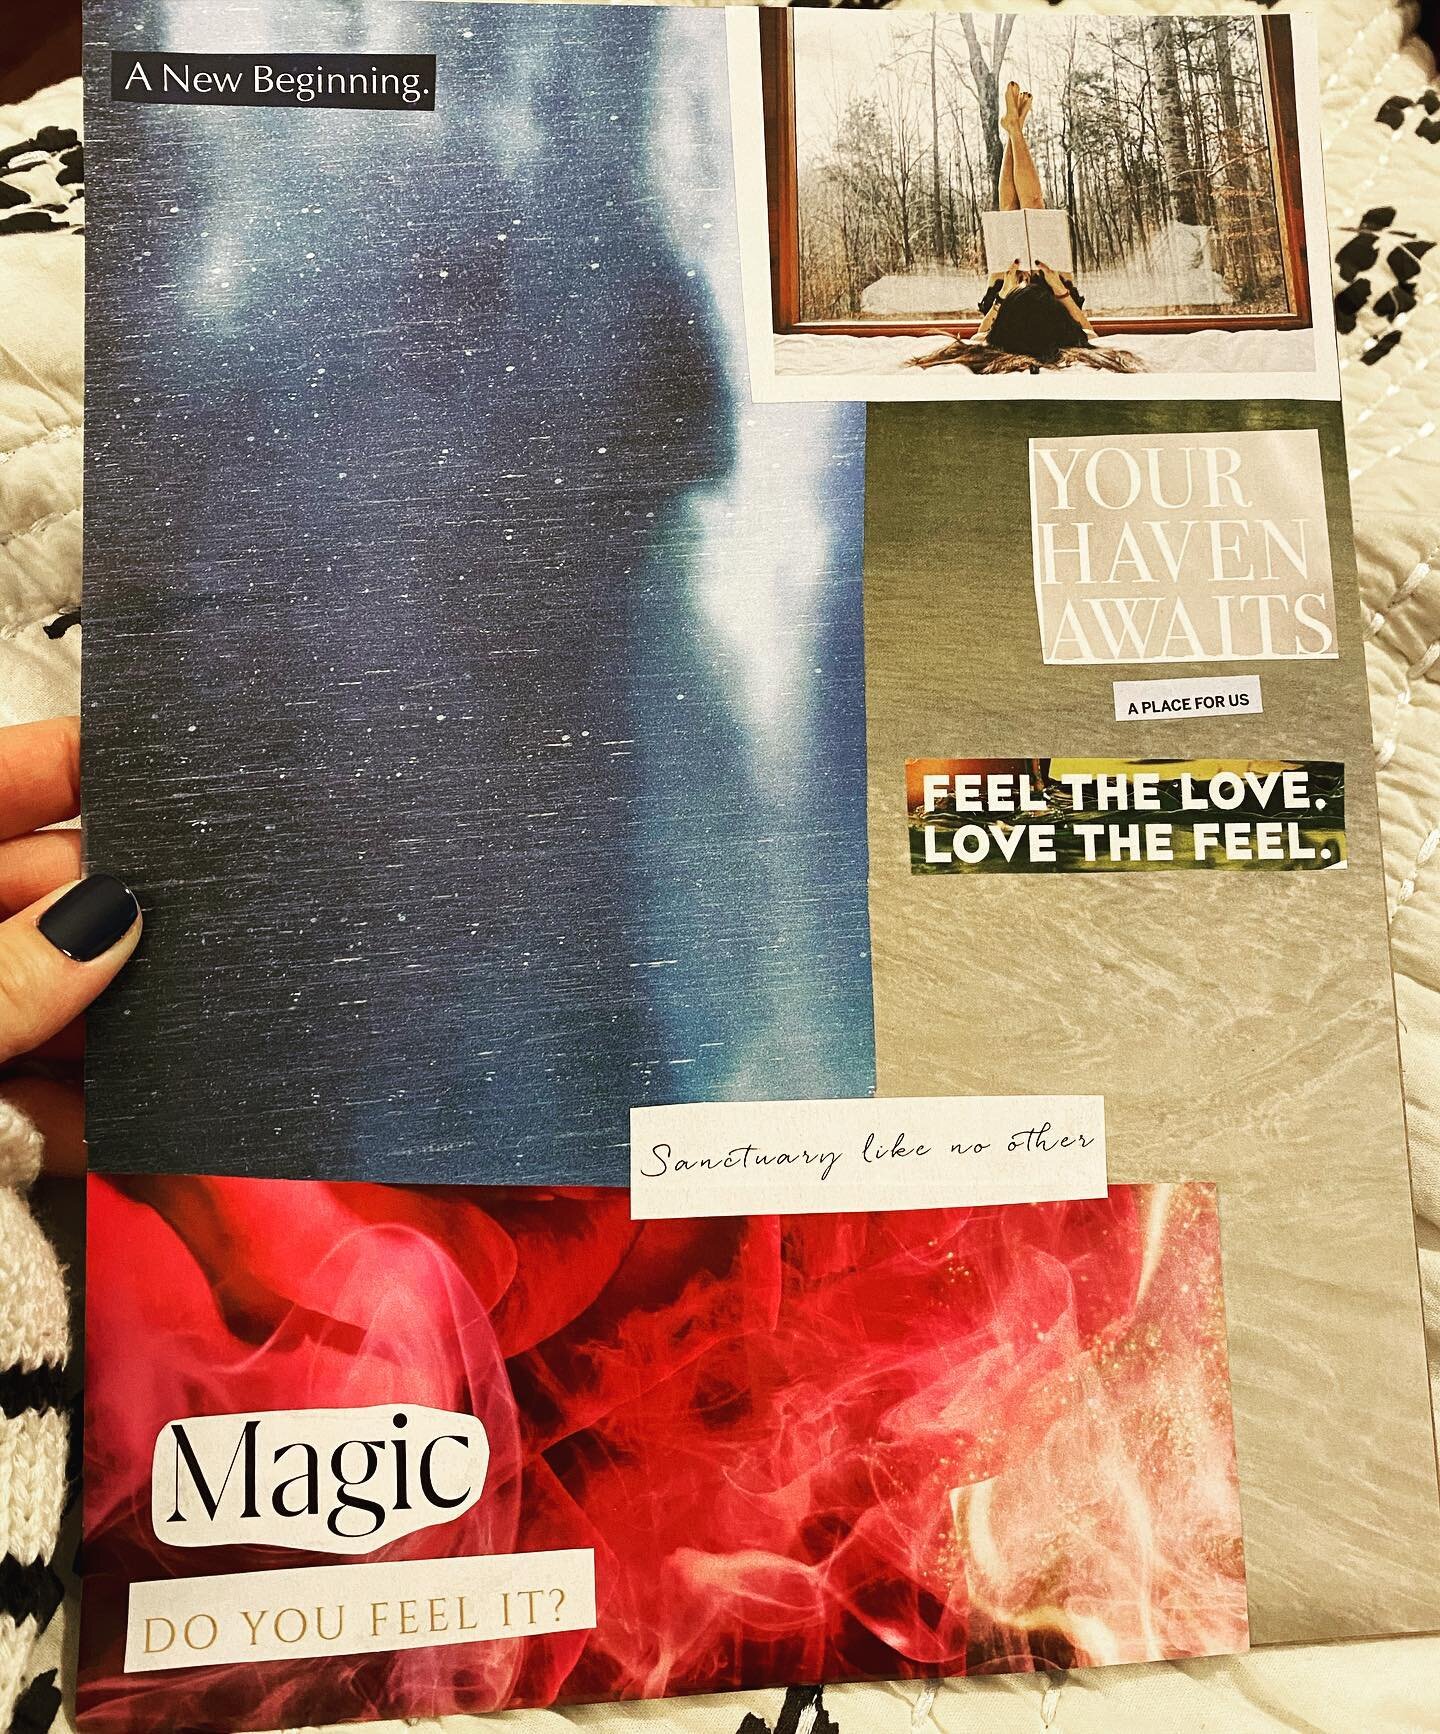 Today I&rsquo;m doing one of my favorite things: visioning in my cozy bed. This particular (in progress) board is about Badass Self-Care 2021.

I&rsquo;ve loved cutting up magazines and creating collages since I was teenager. (Anyone else miss Sassy 